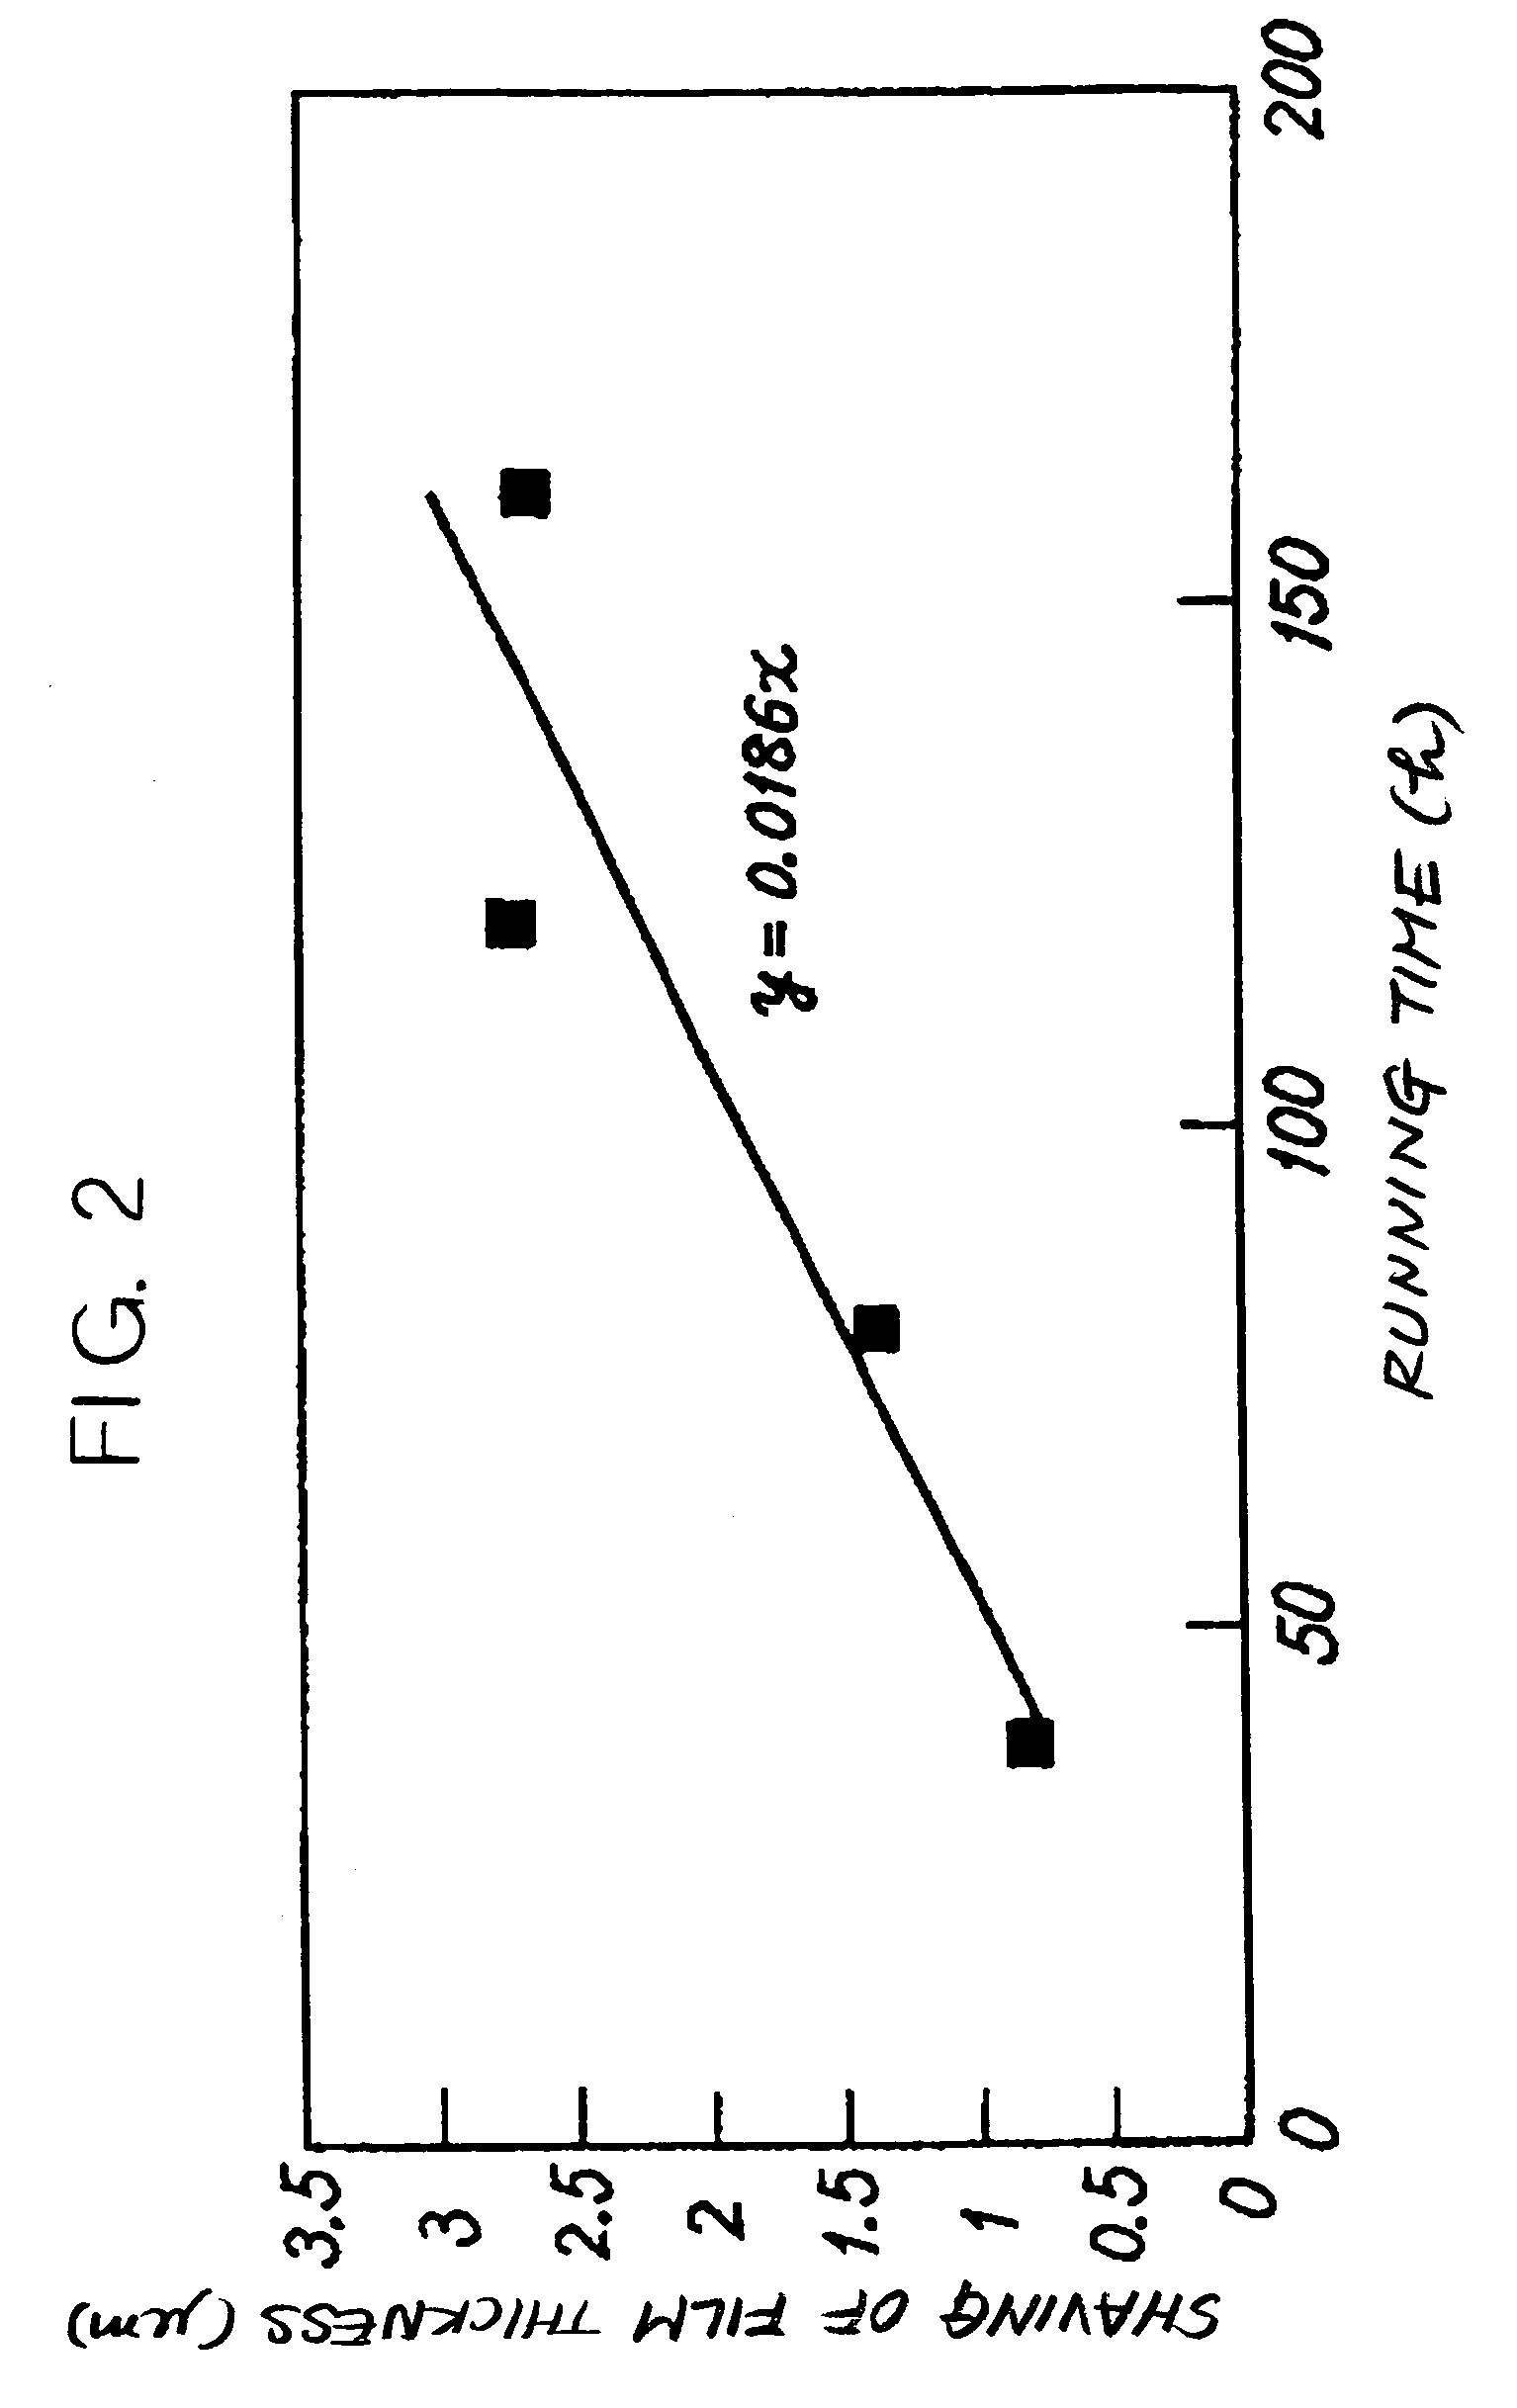 Image forming apparatus using a contact or a proximity type of charging system including a protection substance on a moveable body to be charged